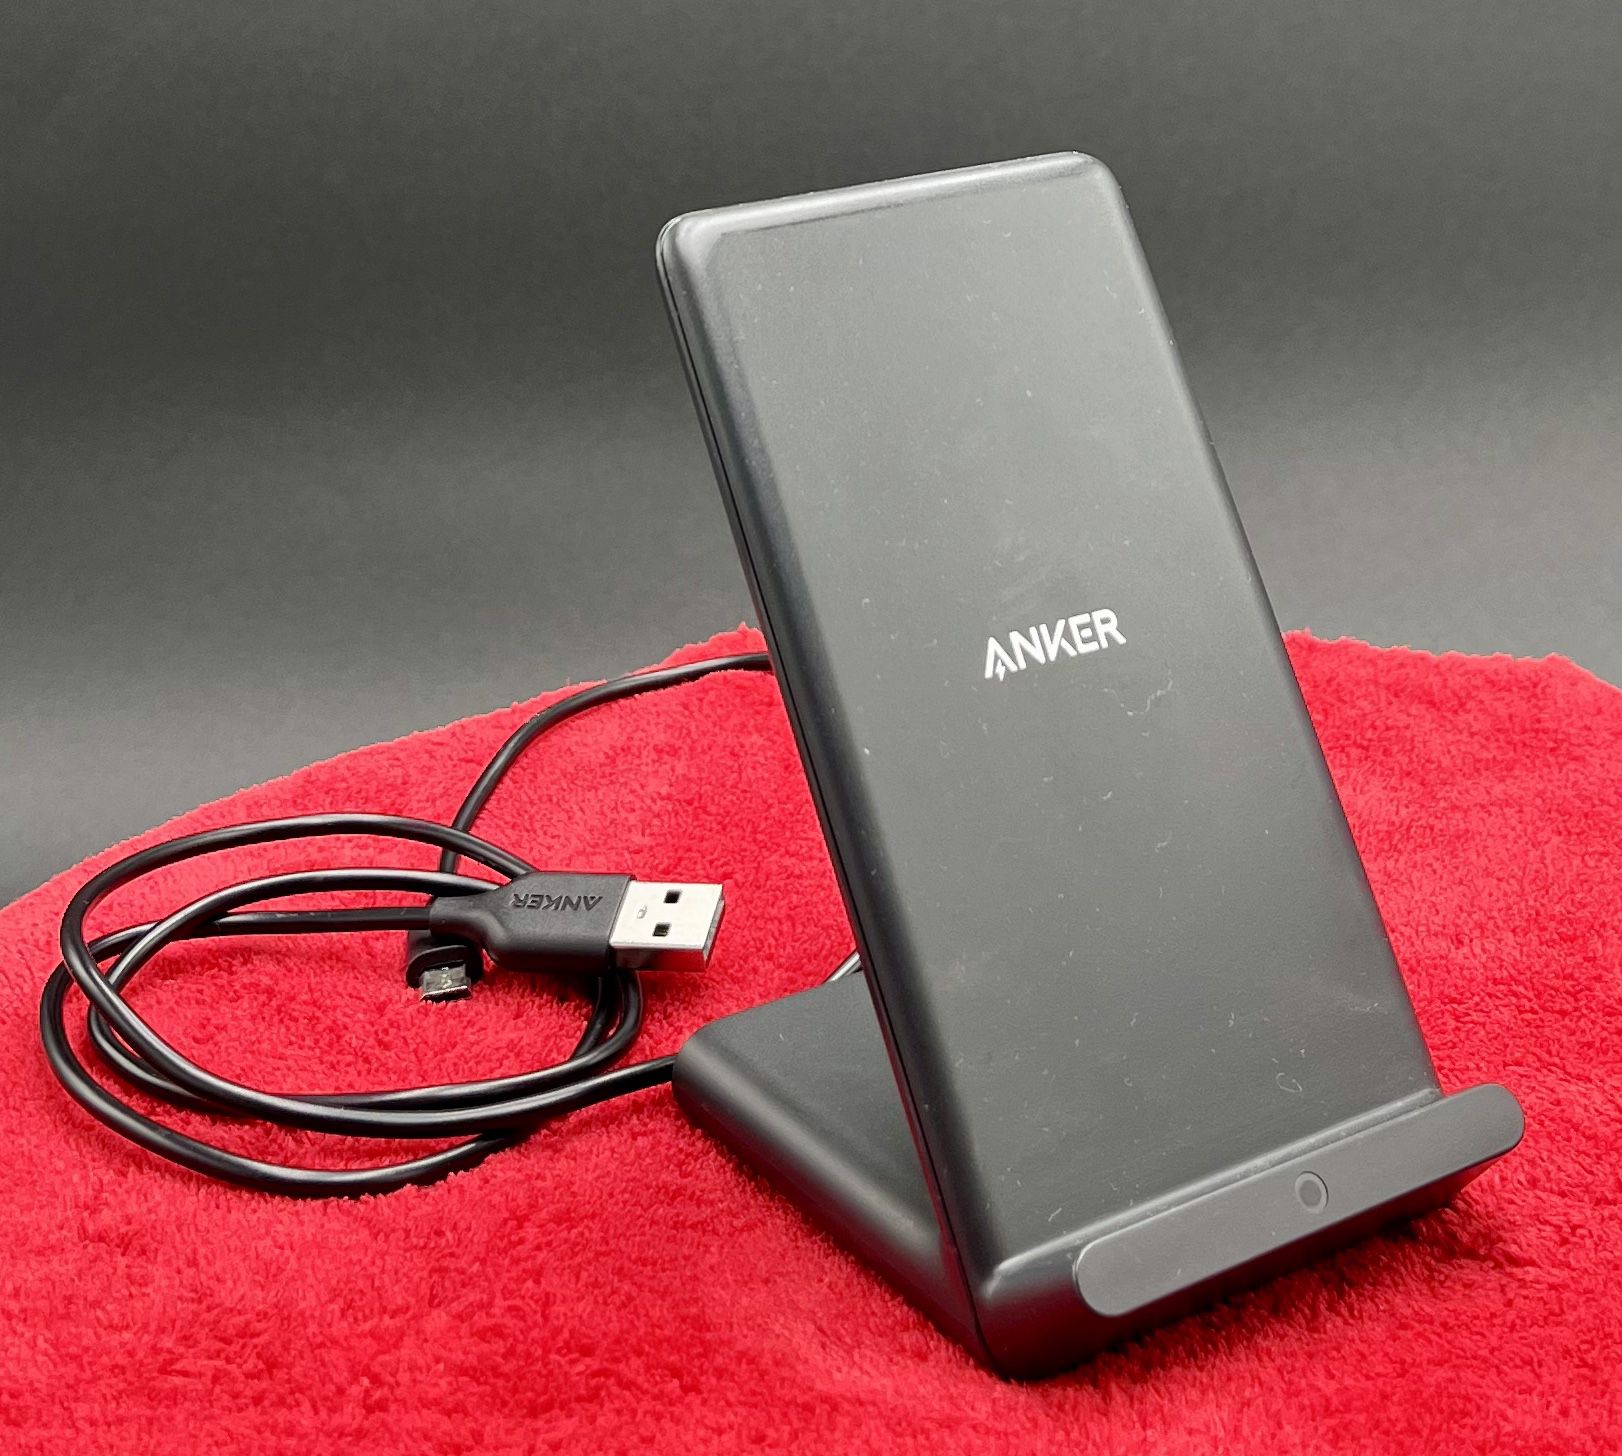 ANKER cordless charger w/ usb power